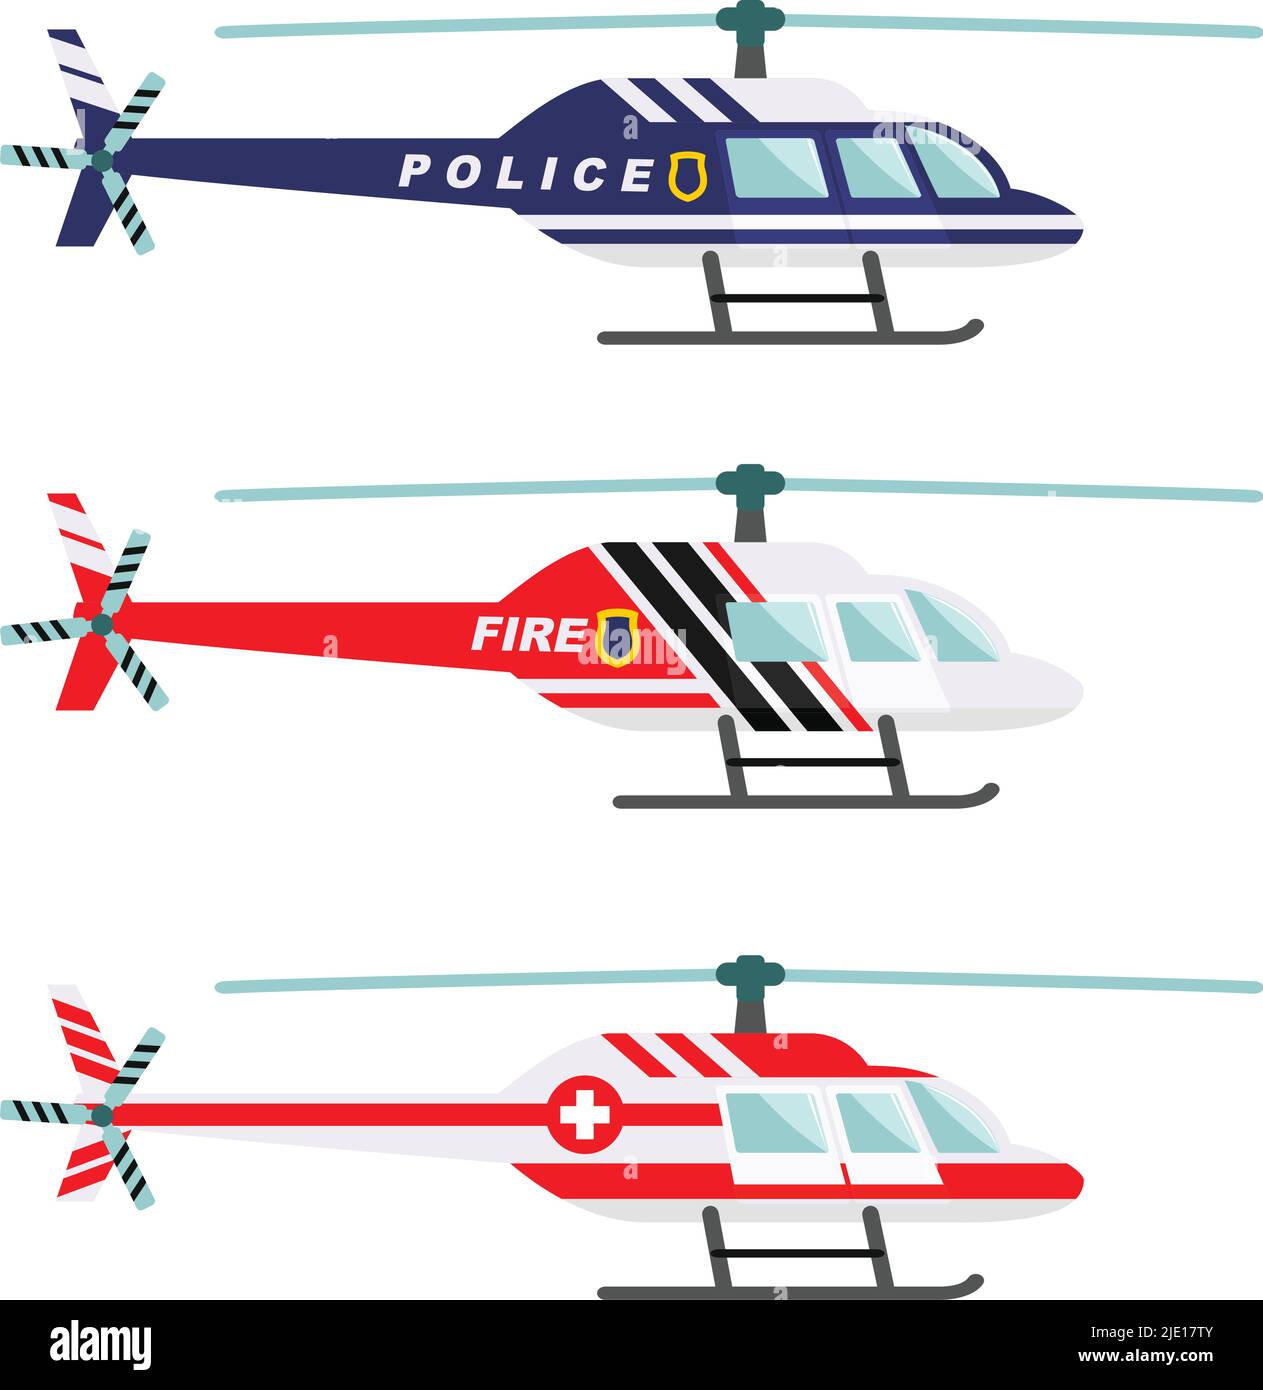 Detailed illustration of medical, police and fire helicopter in flat style on white background. Stock Vector